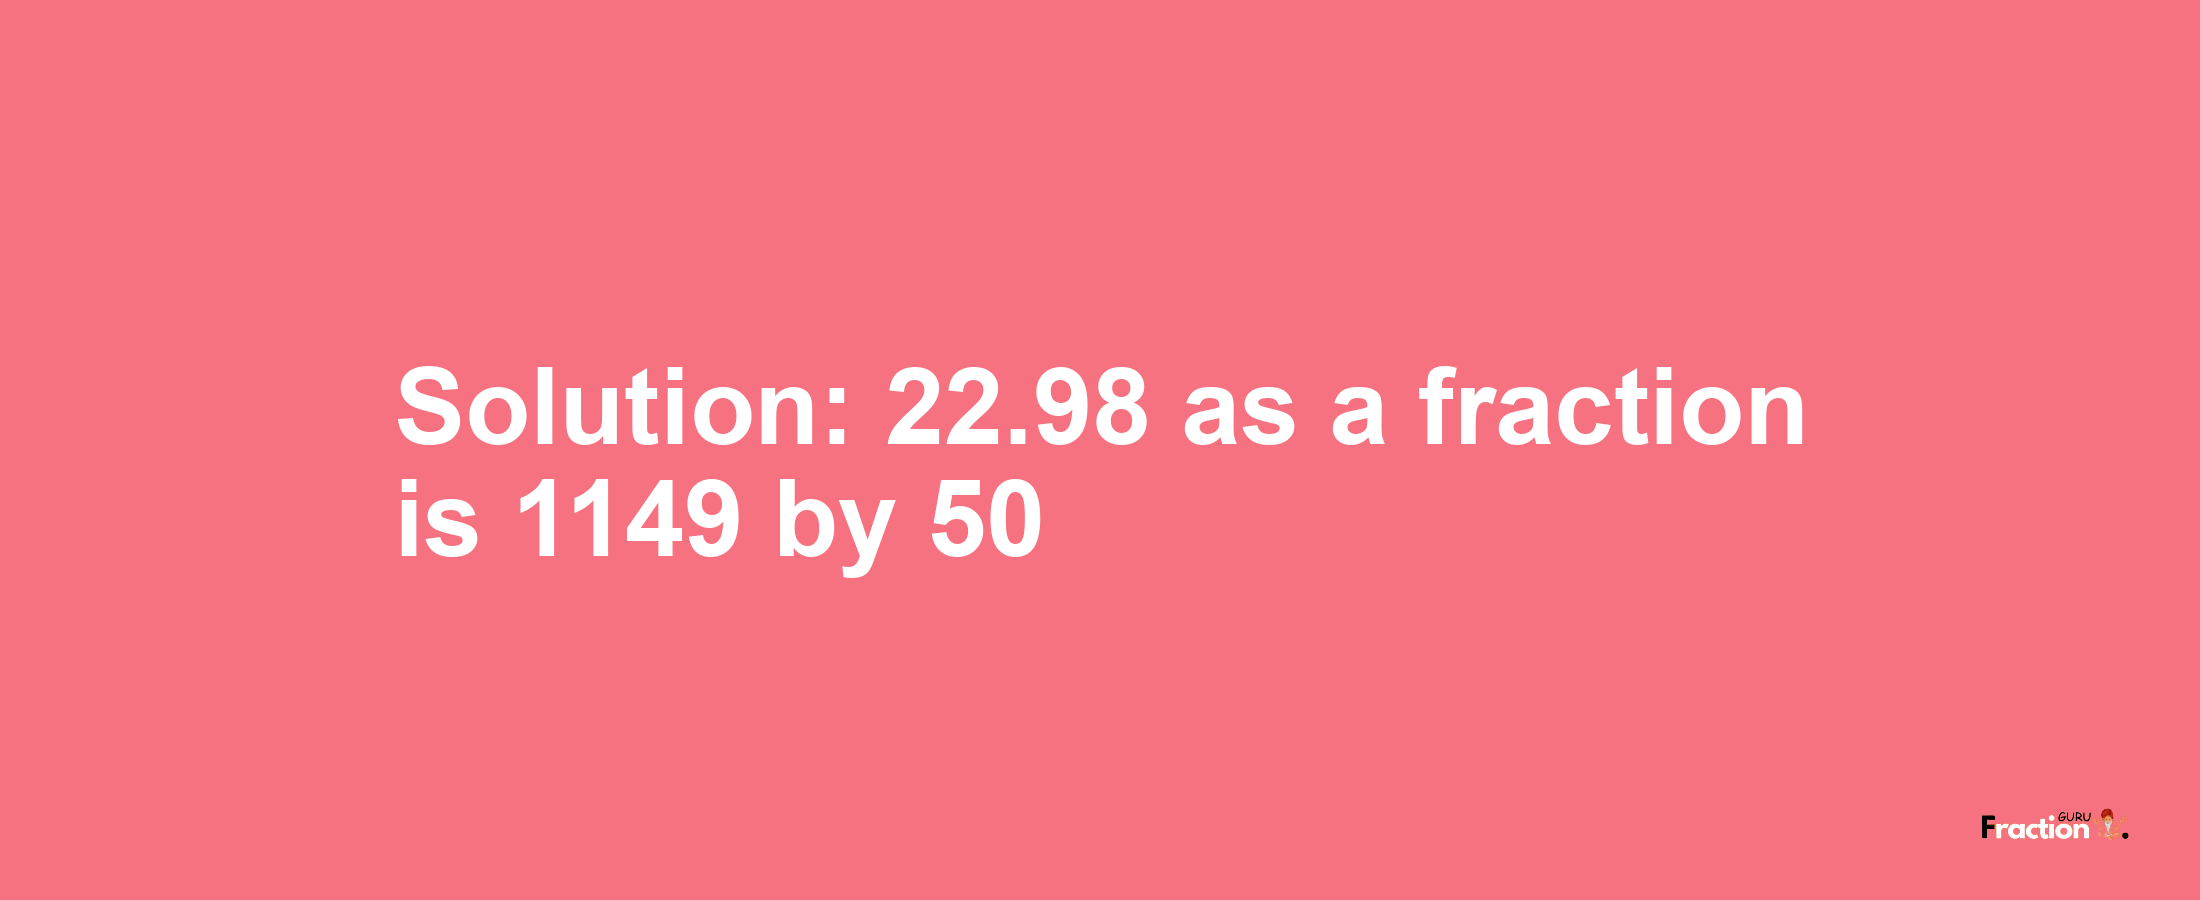 Solution:22.98 as a fraction is 1149/50